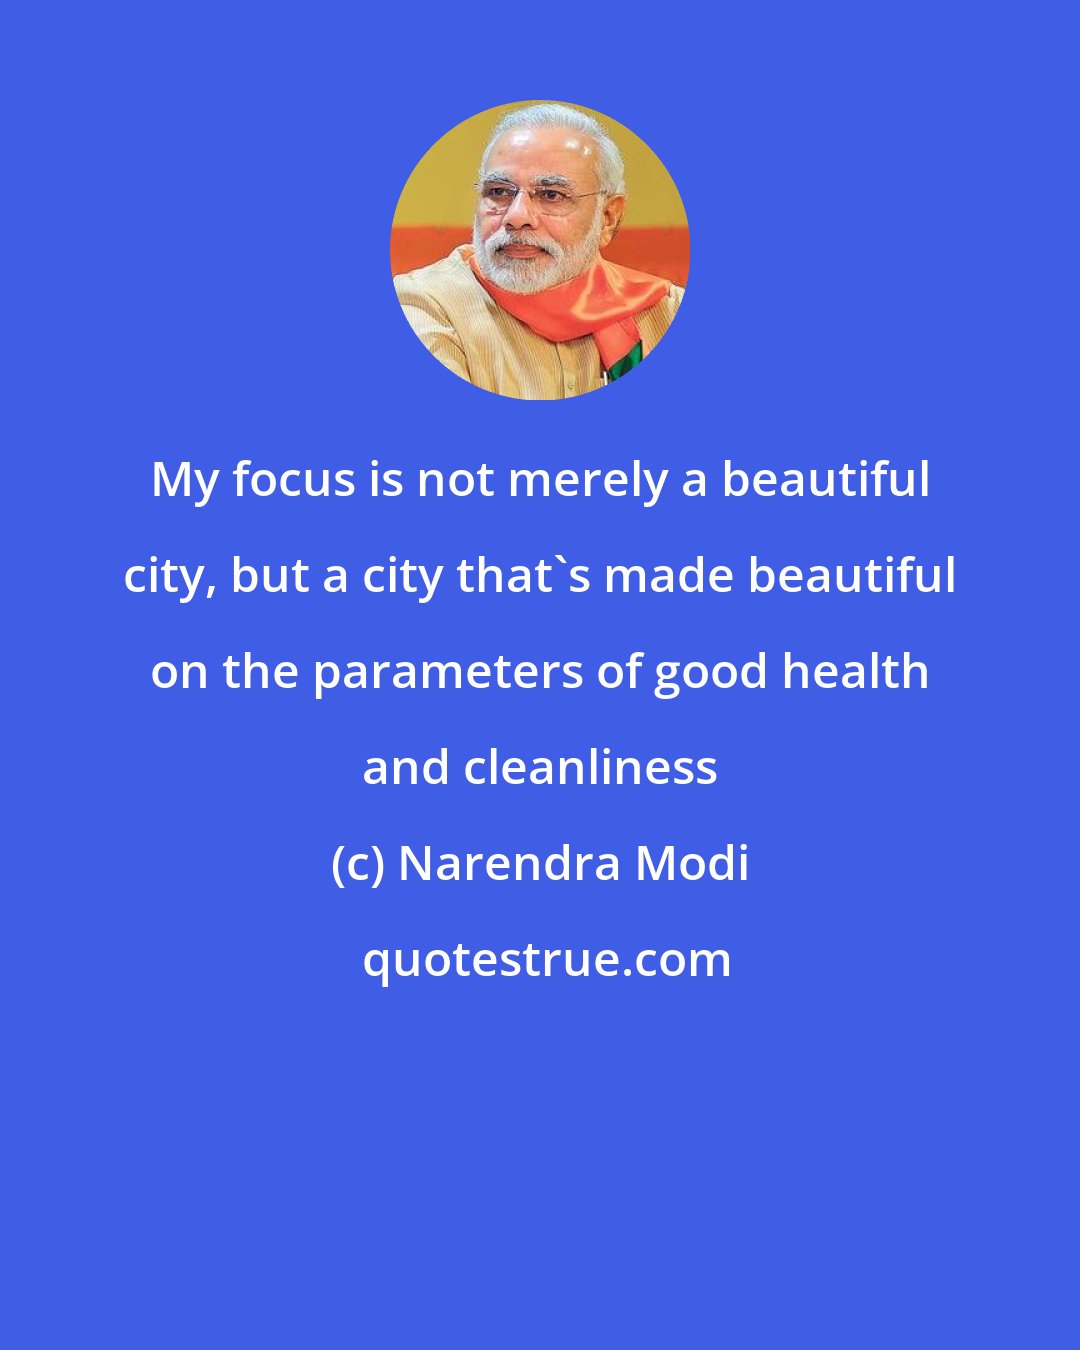 Narendra Modi: My focus is not merely a beautiful city, but a city that's made beautiful on the parameters of good health and cleanliness